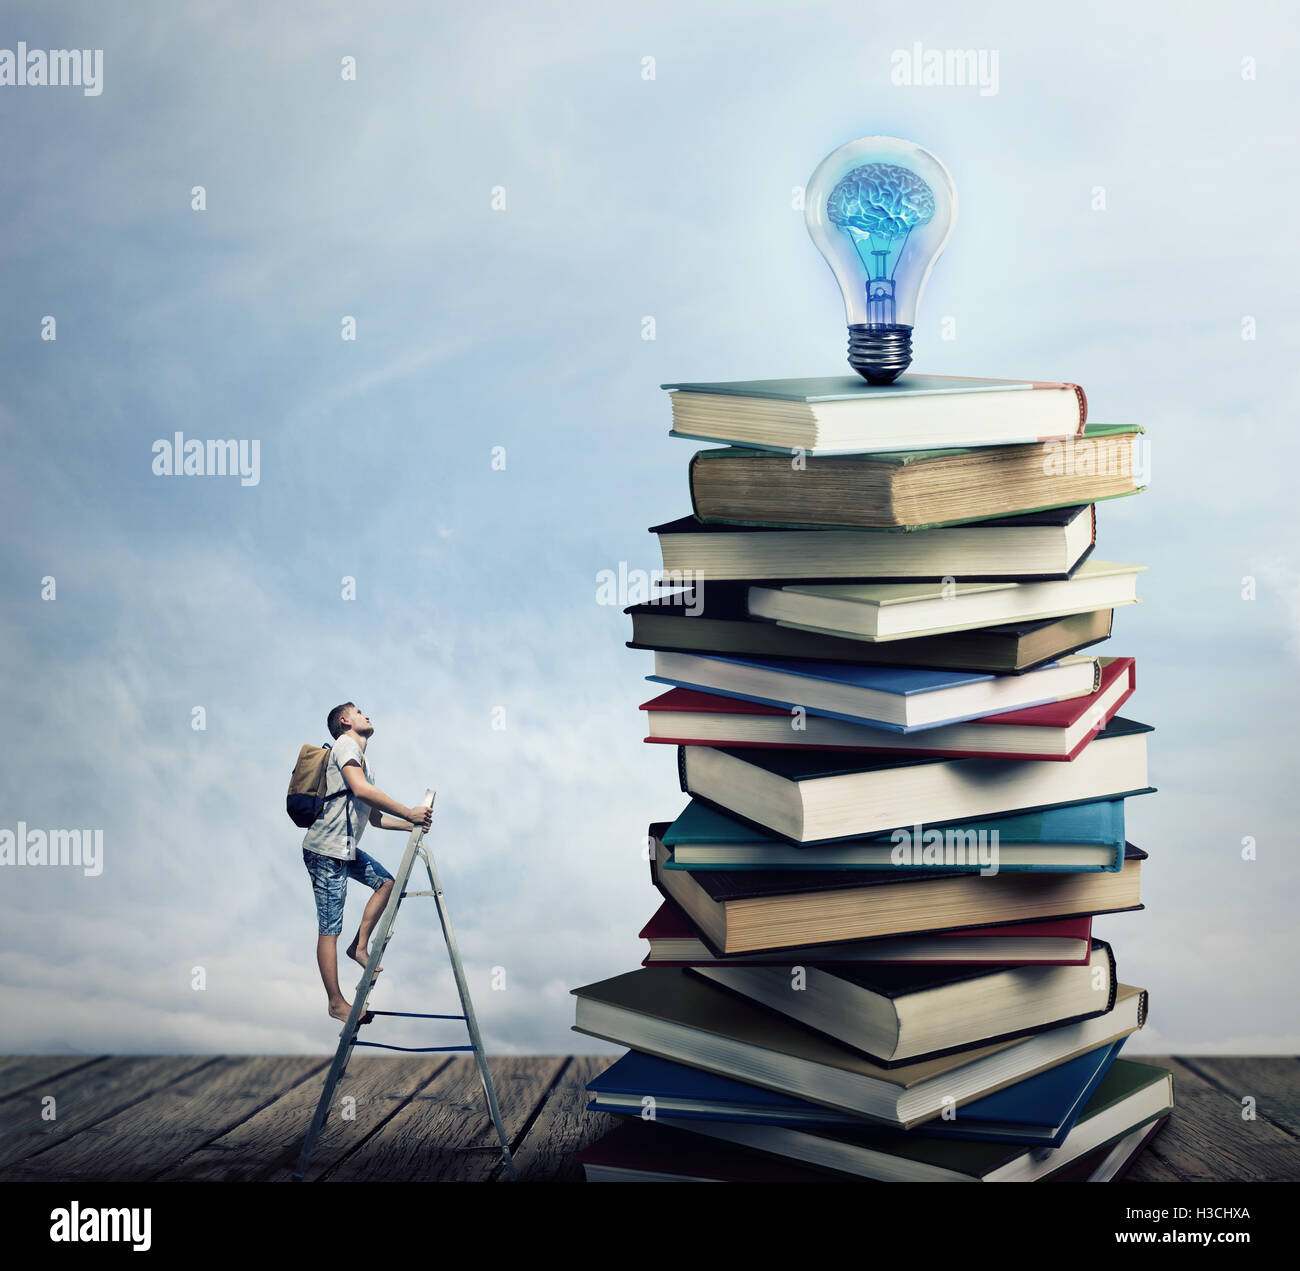 Young boy on the ladder, with a bag on his back, trying to climb a pile of books looking for a lightbulb. In search of knowlegde Stock Photo